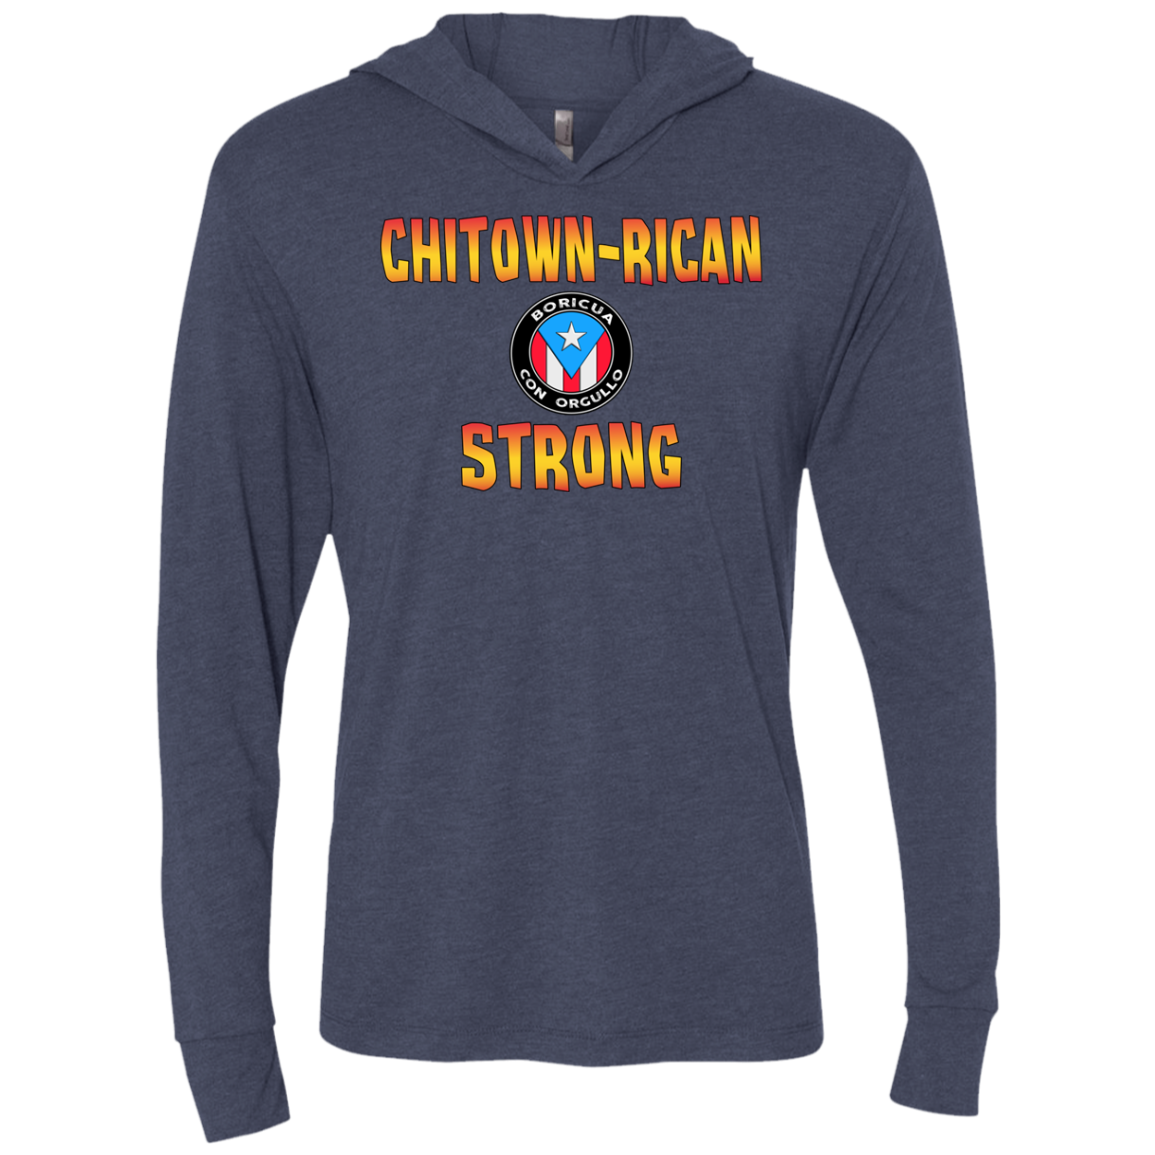 Chitown Rican Strong Unisex Triblend LS Hooded T-Shirt - Puerto Rican Pride